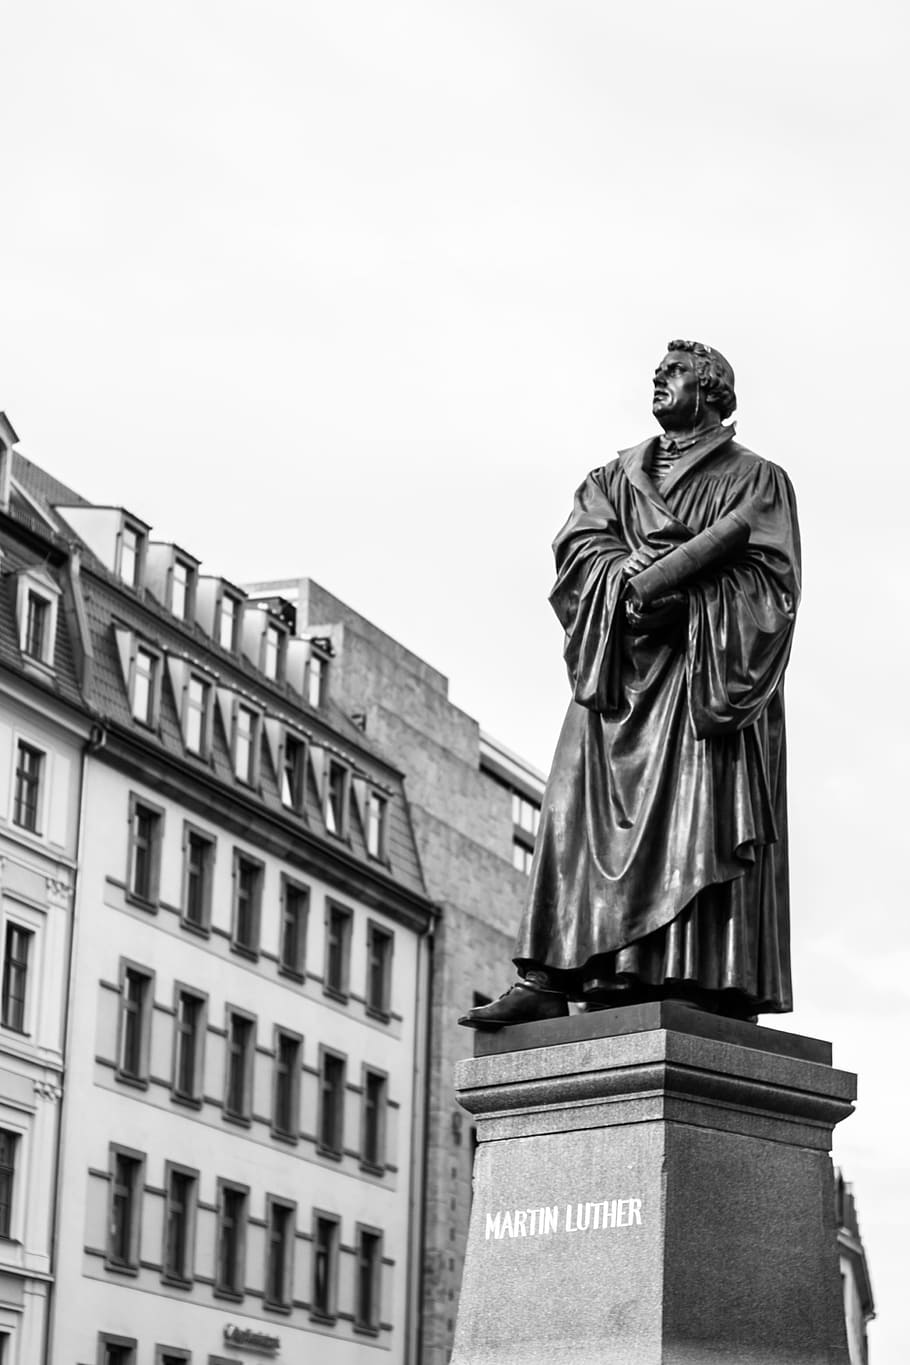 martin luther, neumarkt, dresden, black and white, monument, sculpture, architecture, germany, protestant, church